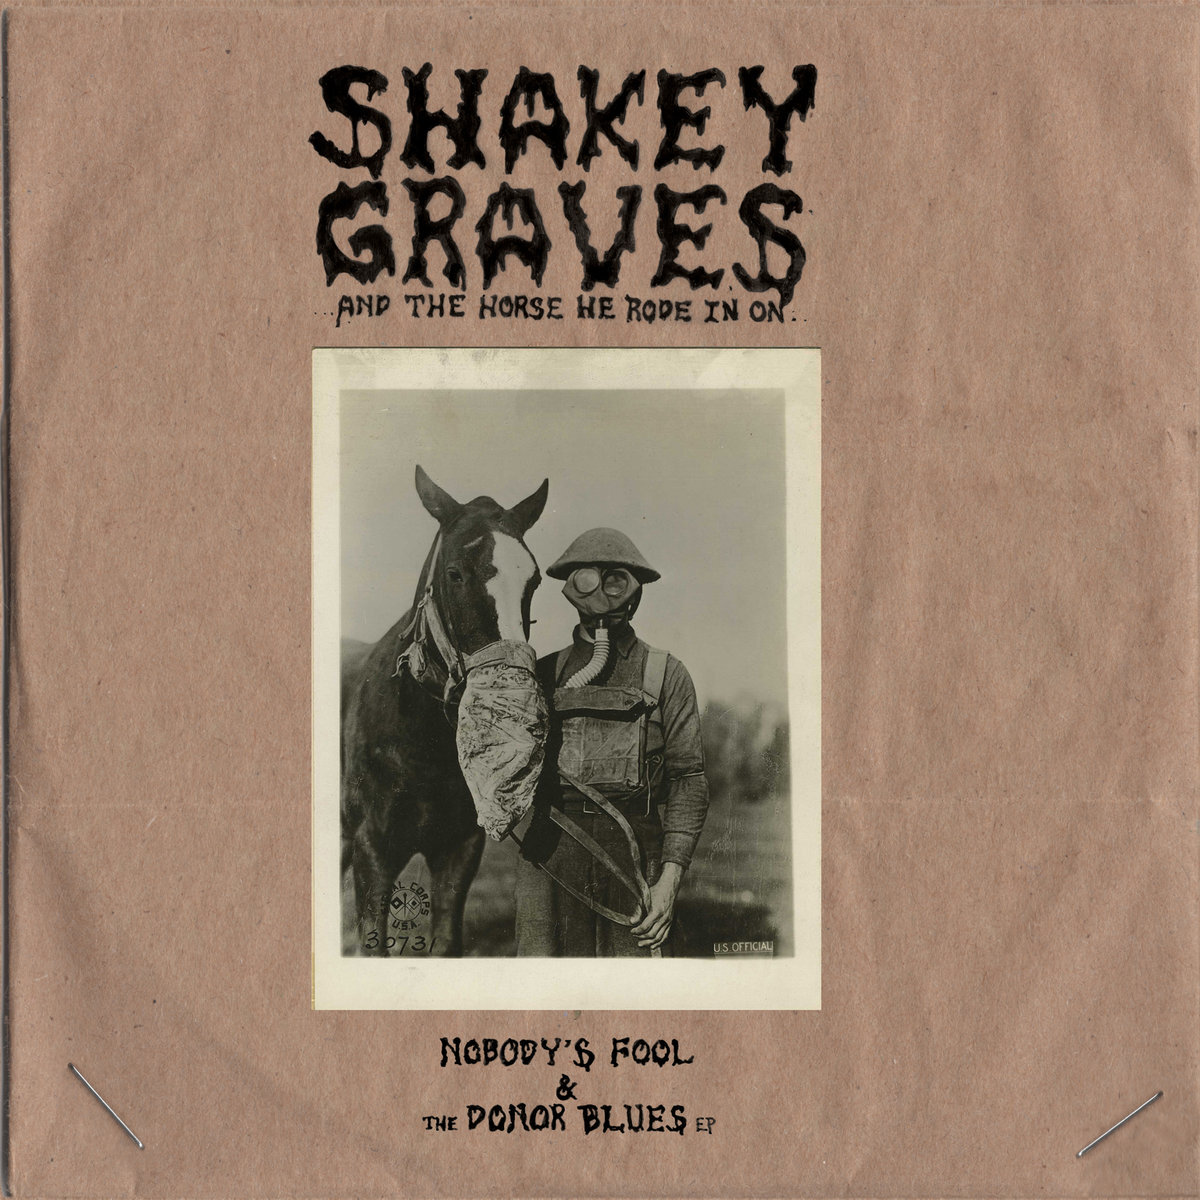 Shakey Graves And The Horse He Rode In On...